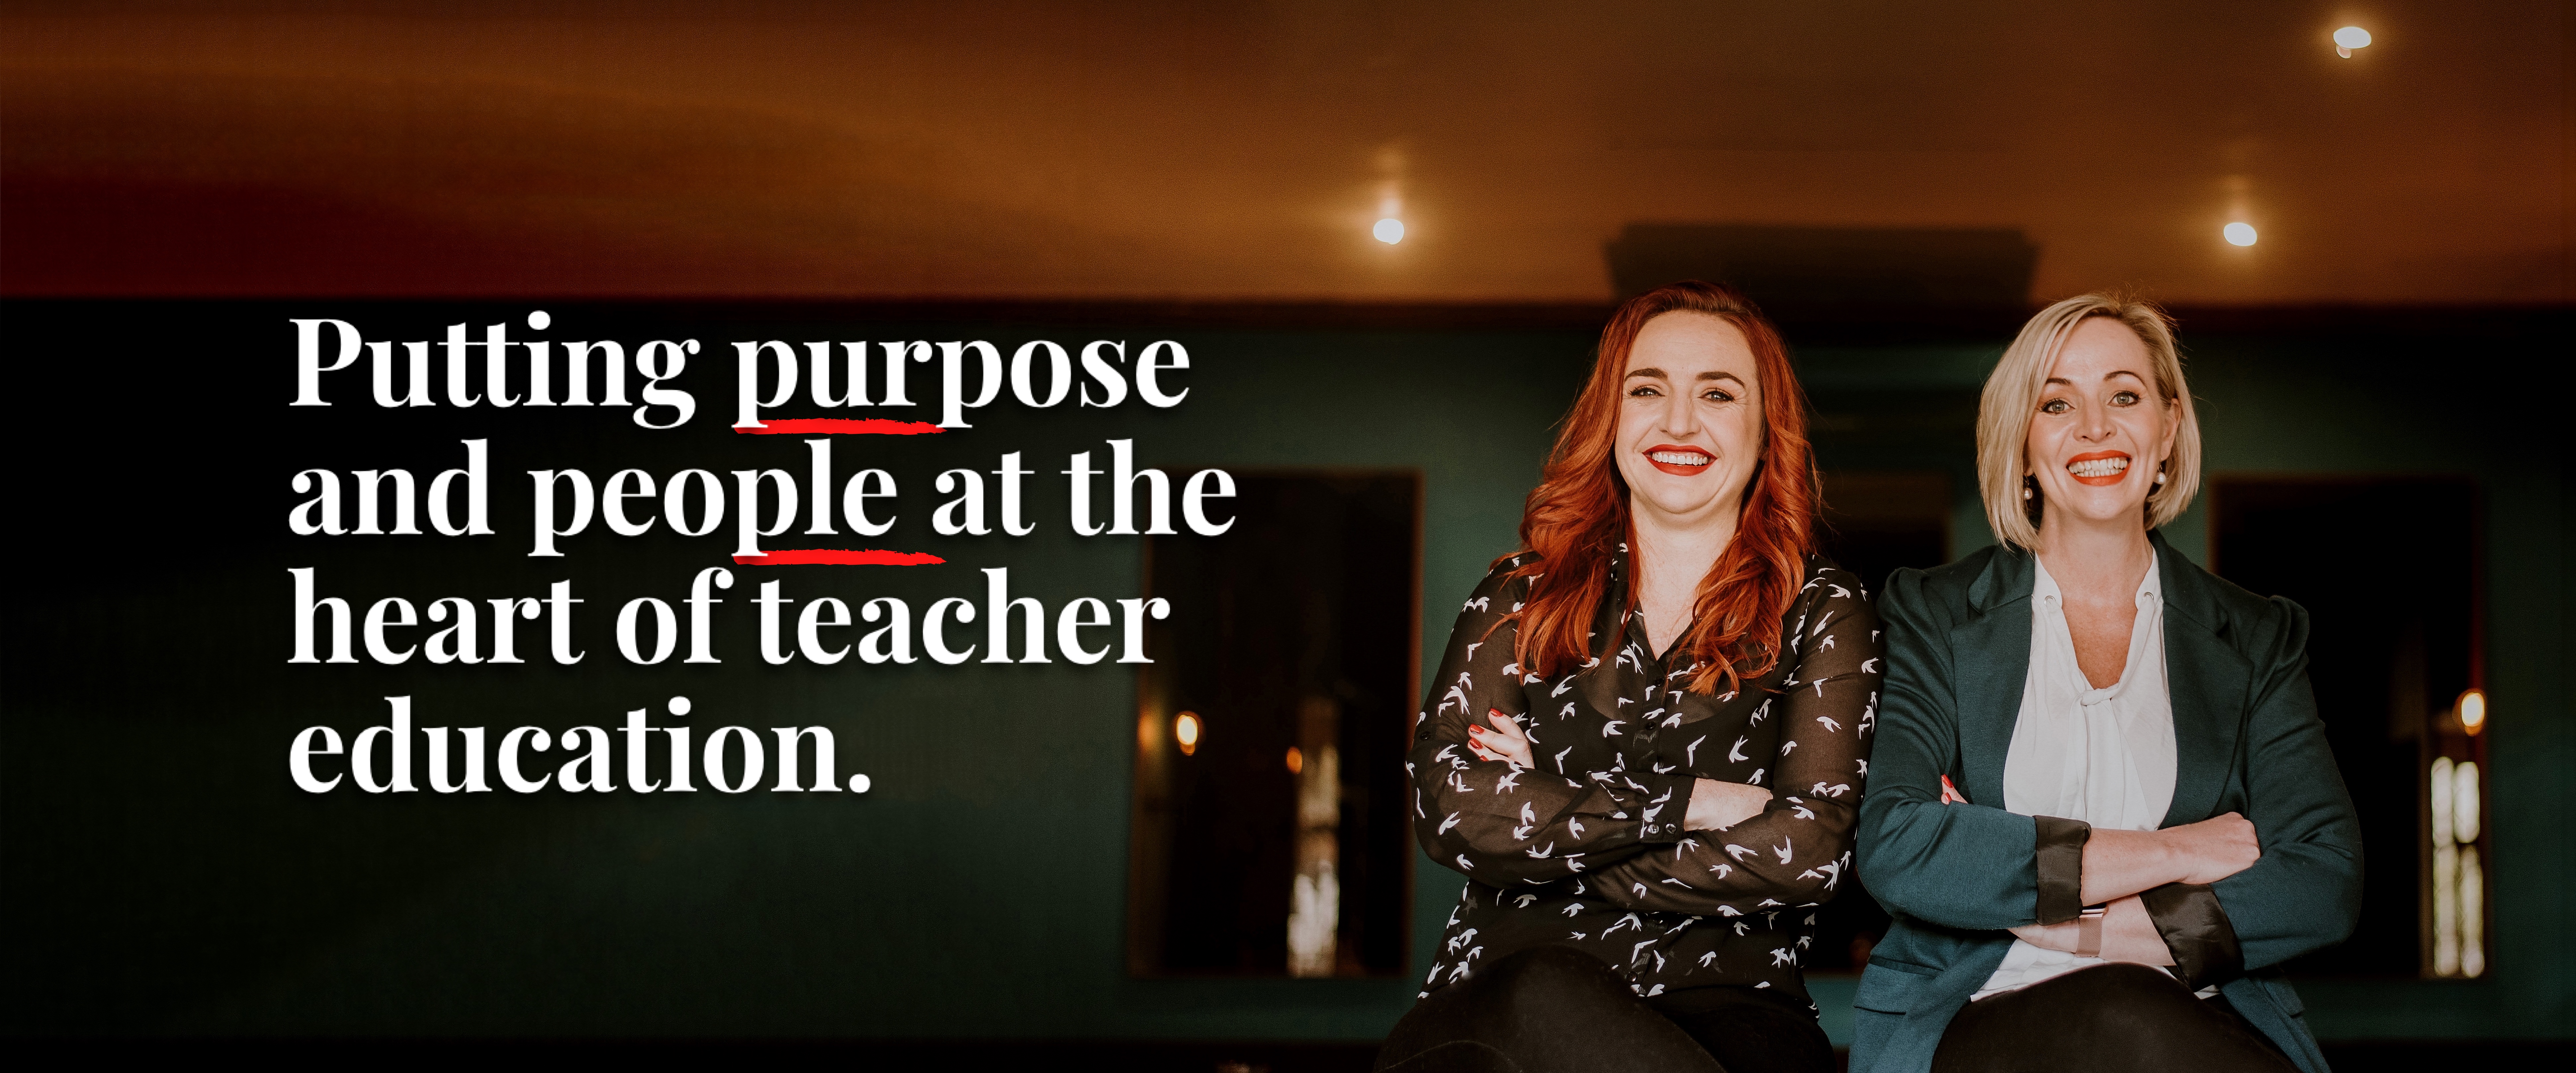 Putting purpose and people at the heart of teacher education